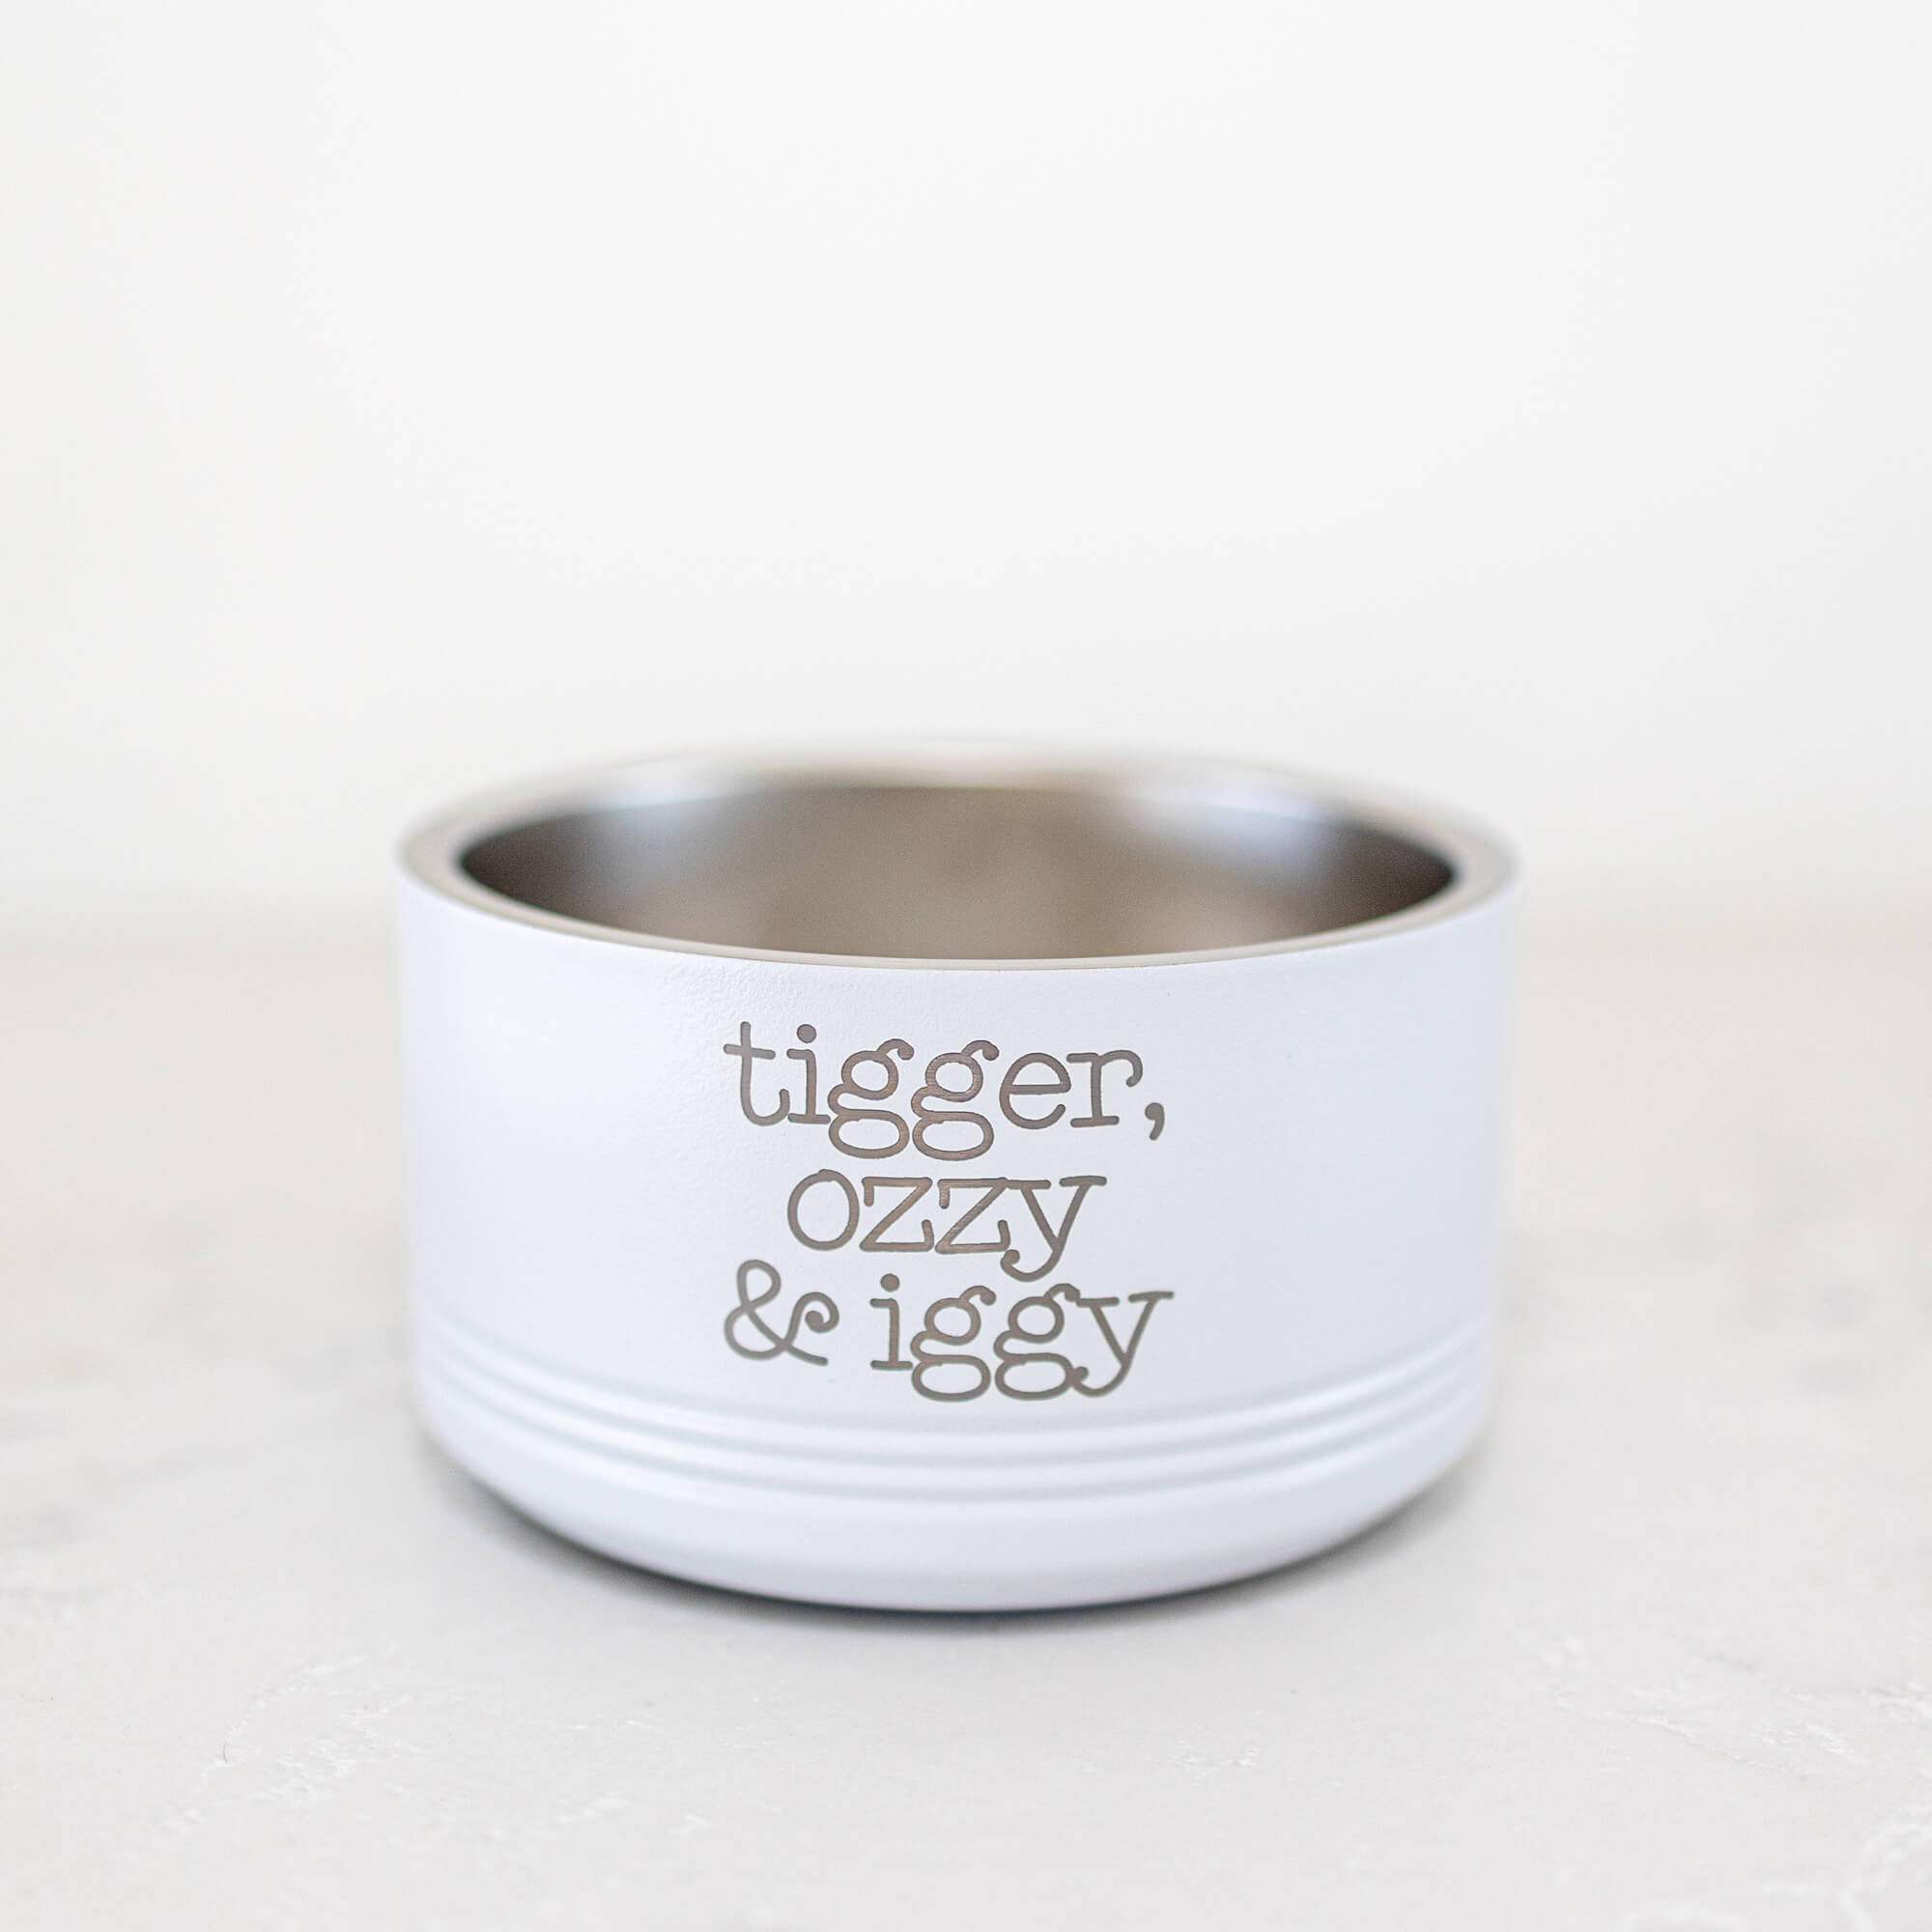 Personalized Pet Bowl - SMALL